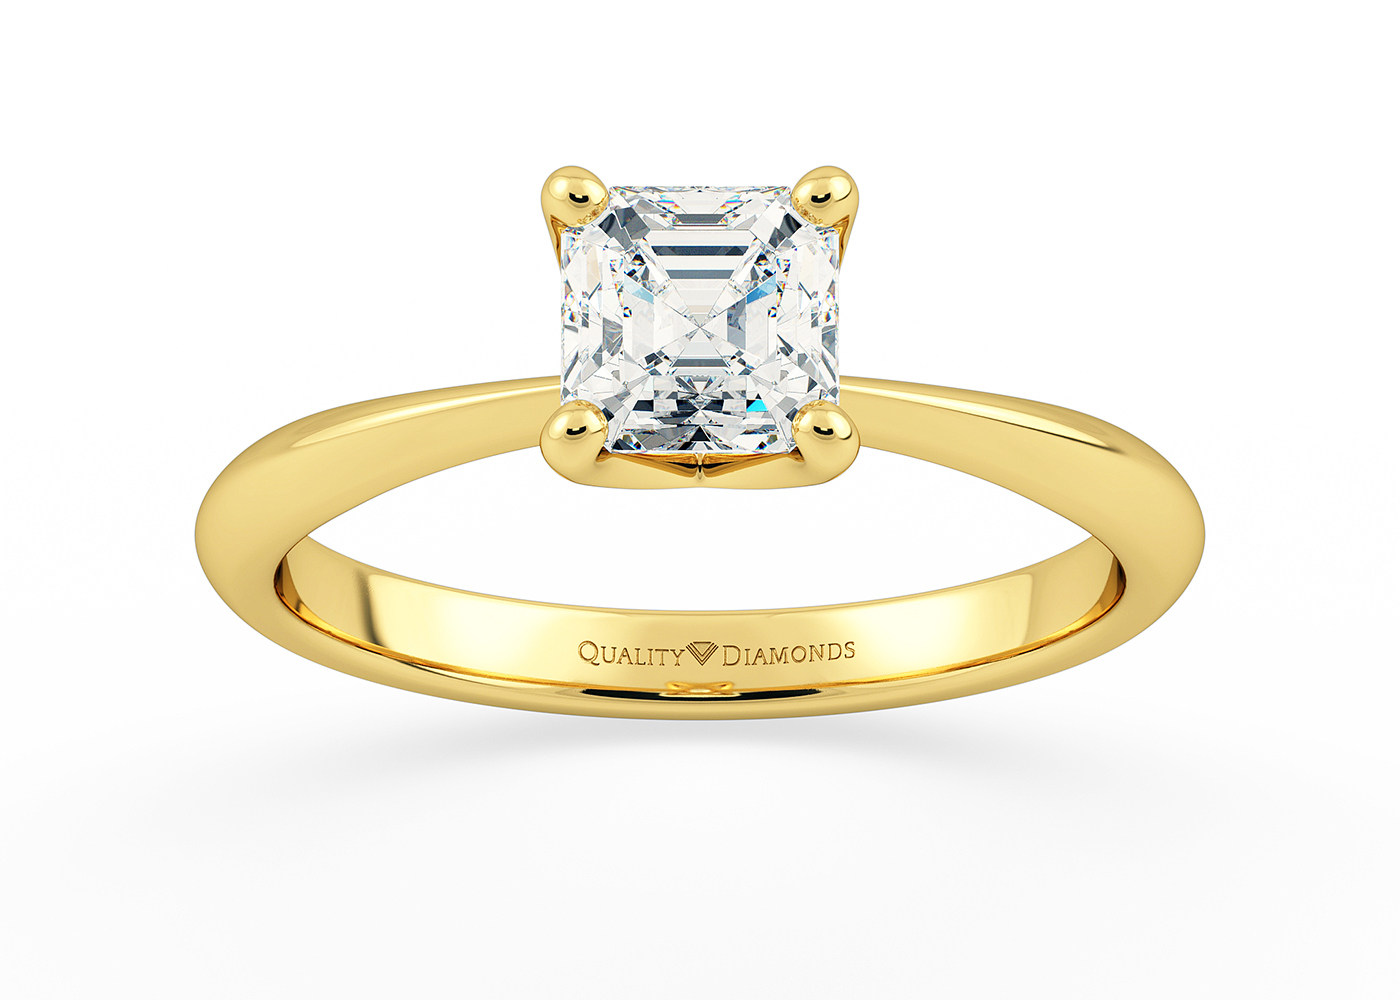 One Carat Asscher Solitaire Diamond Engagement Ring in 18K Yellow Gold